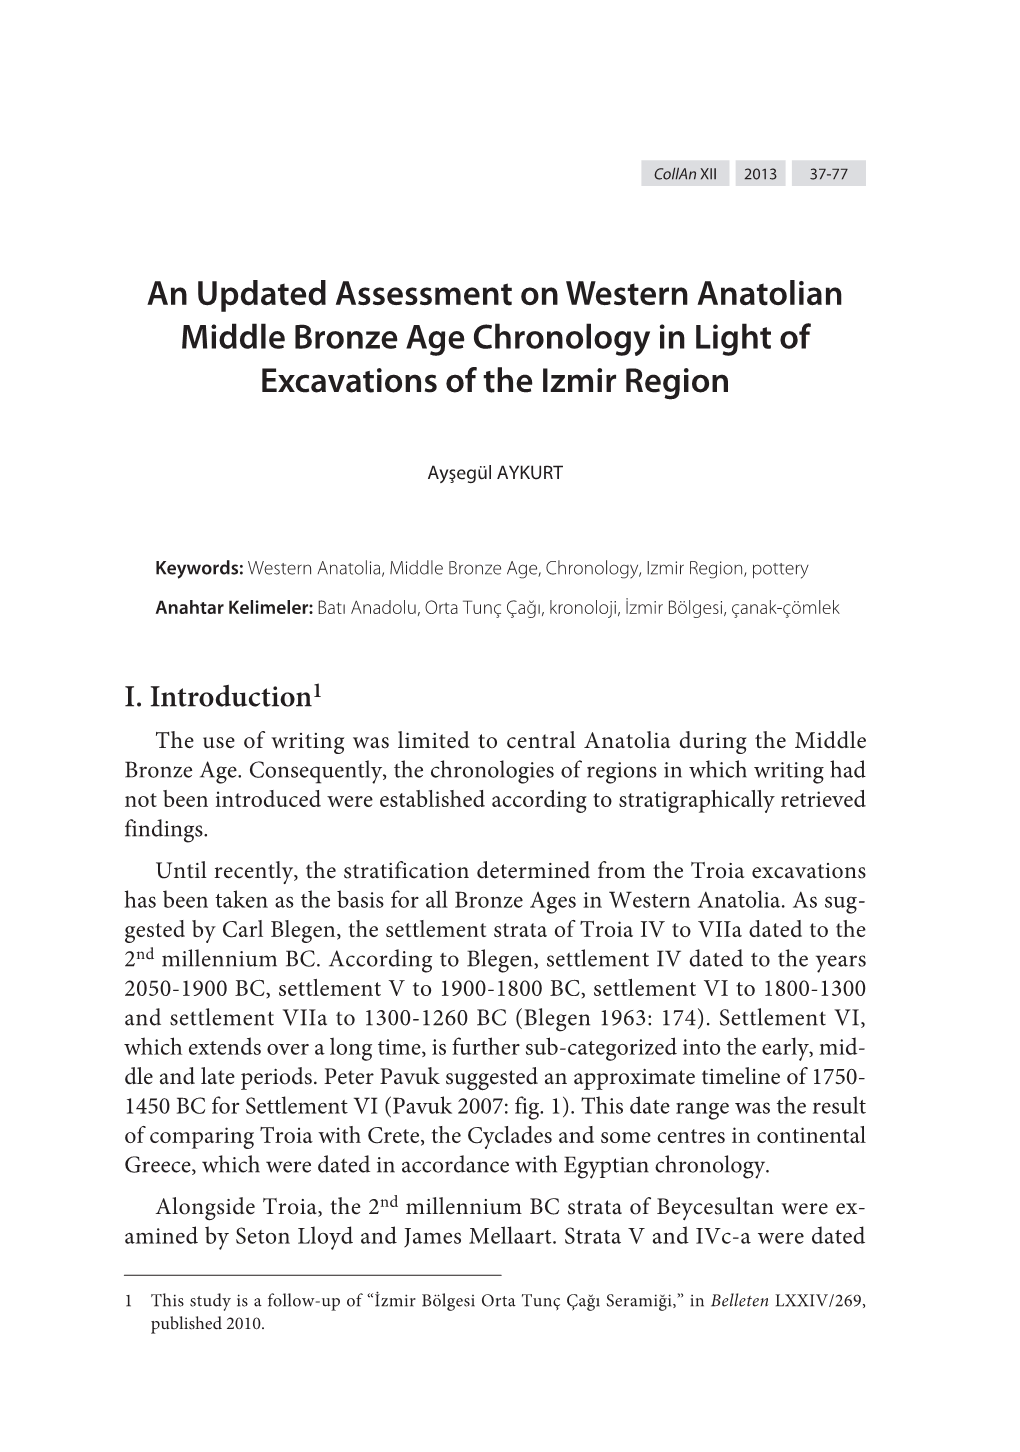 An Updated Assessment on Western Anatolian Middle Bronze Age Chronology in Light of Excavations of the Izmir Region